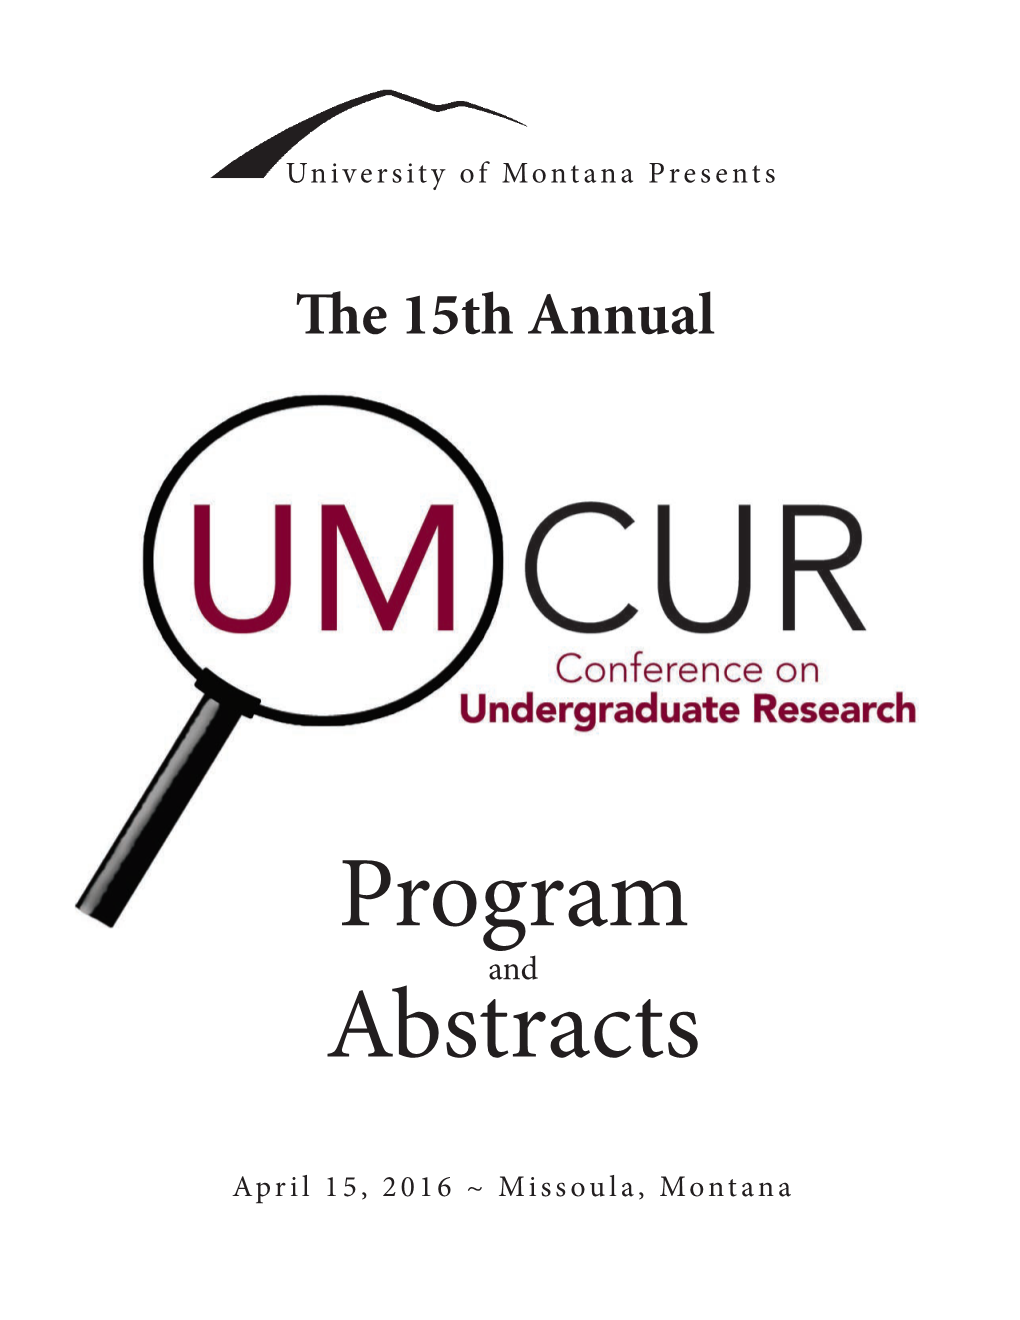 Program Abstracts